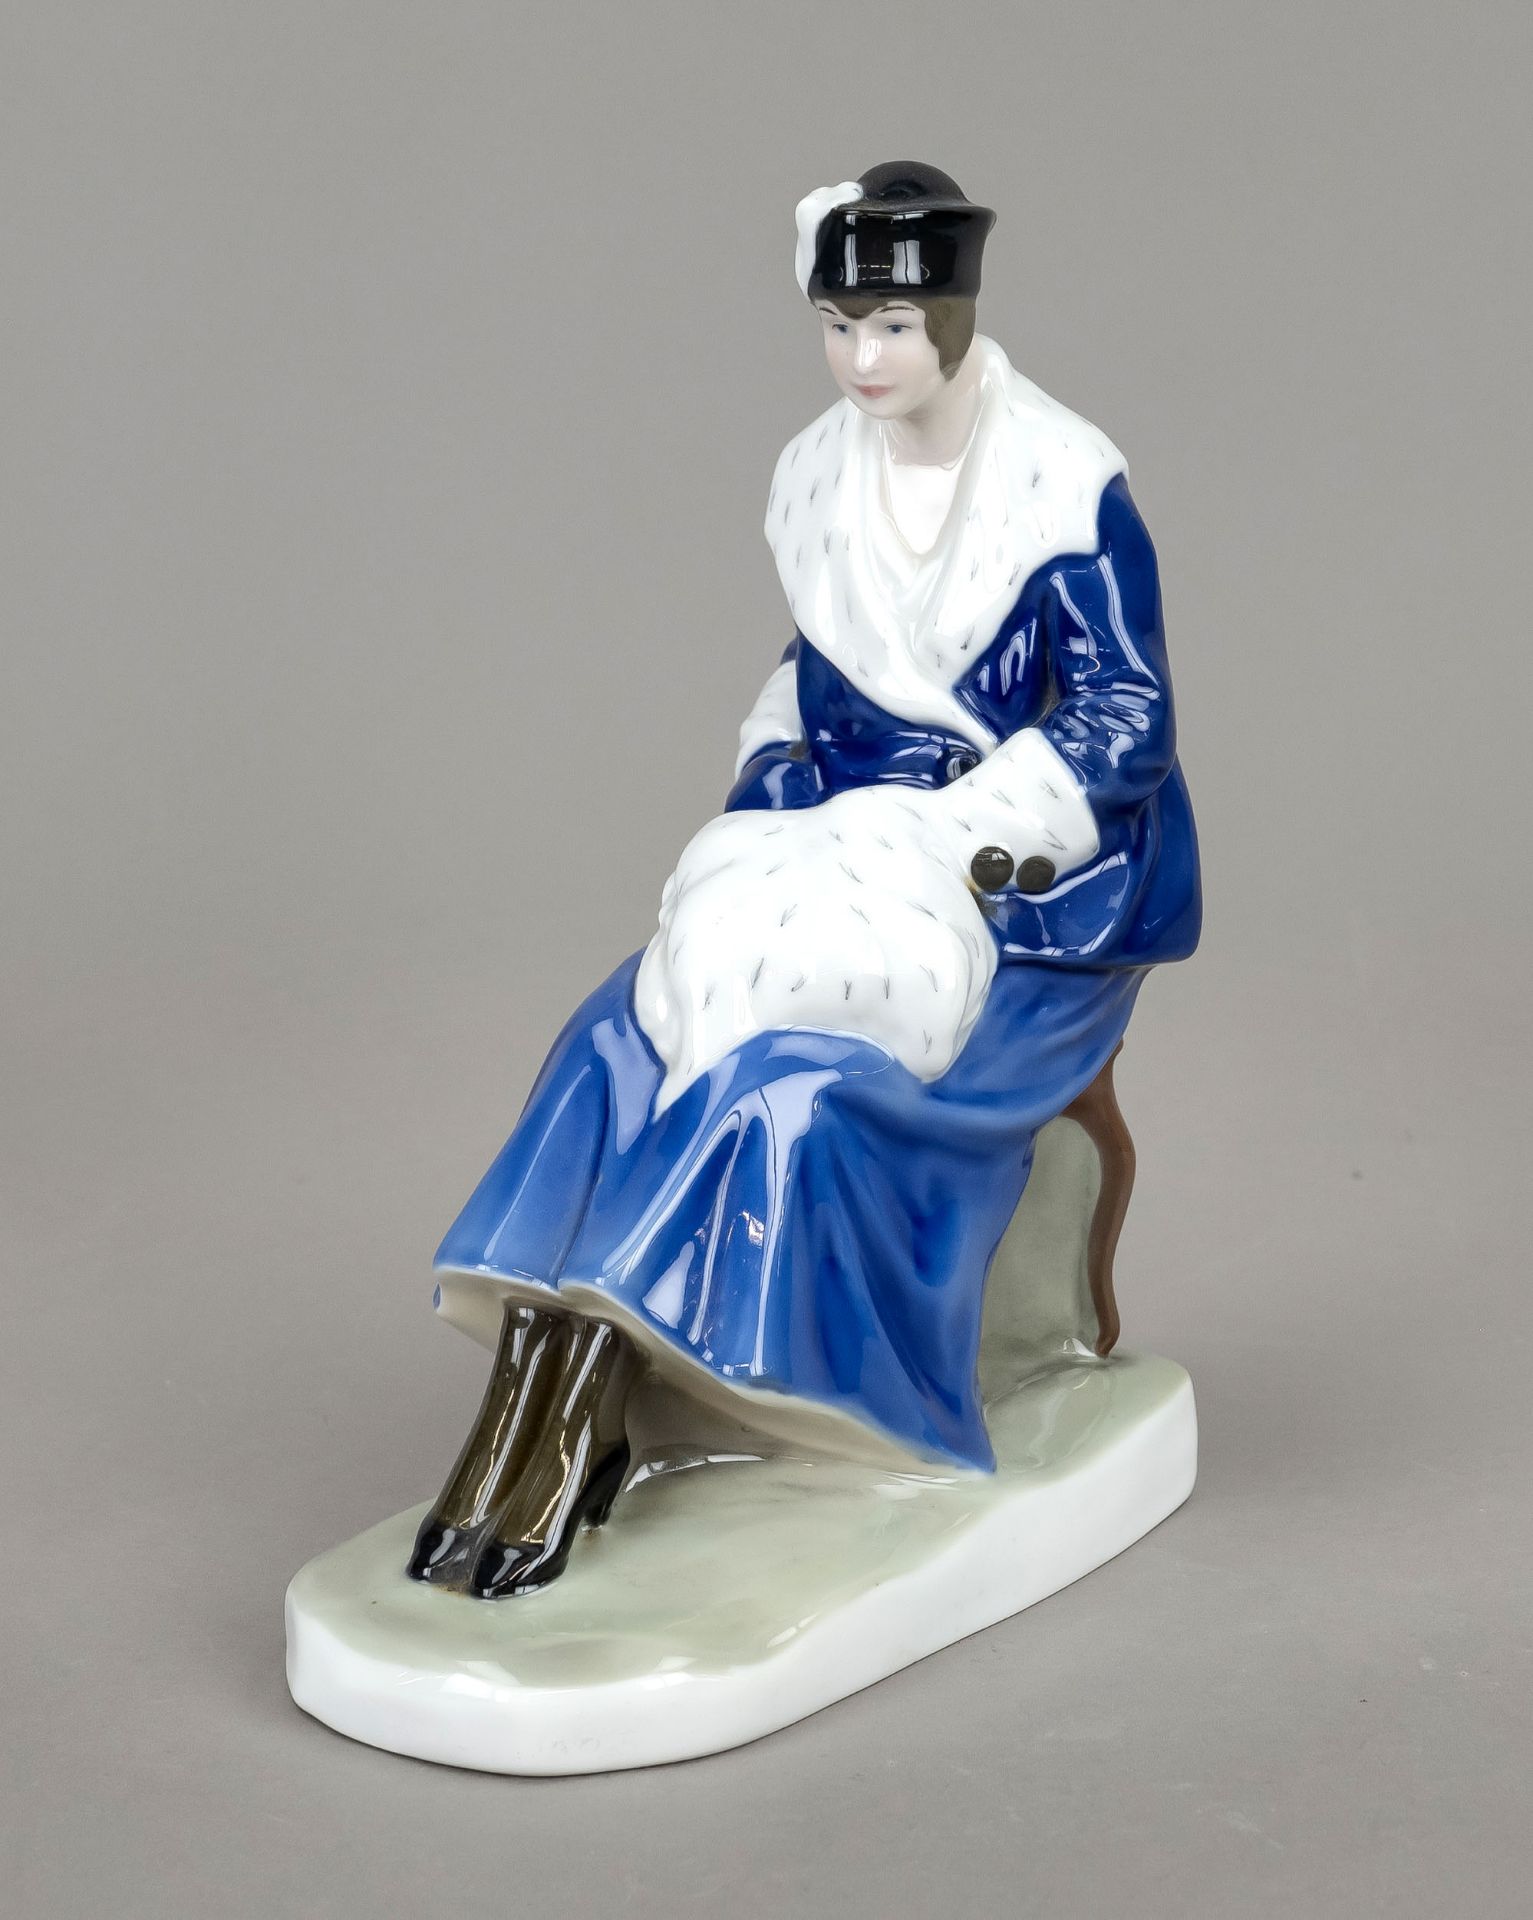 Lady with muff, Fraureuth, art department, Saxony, 1920s, designed by Margarethe Becking around